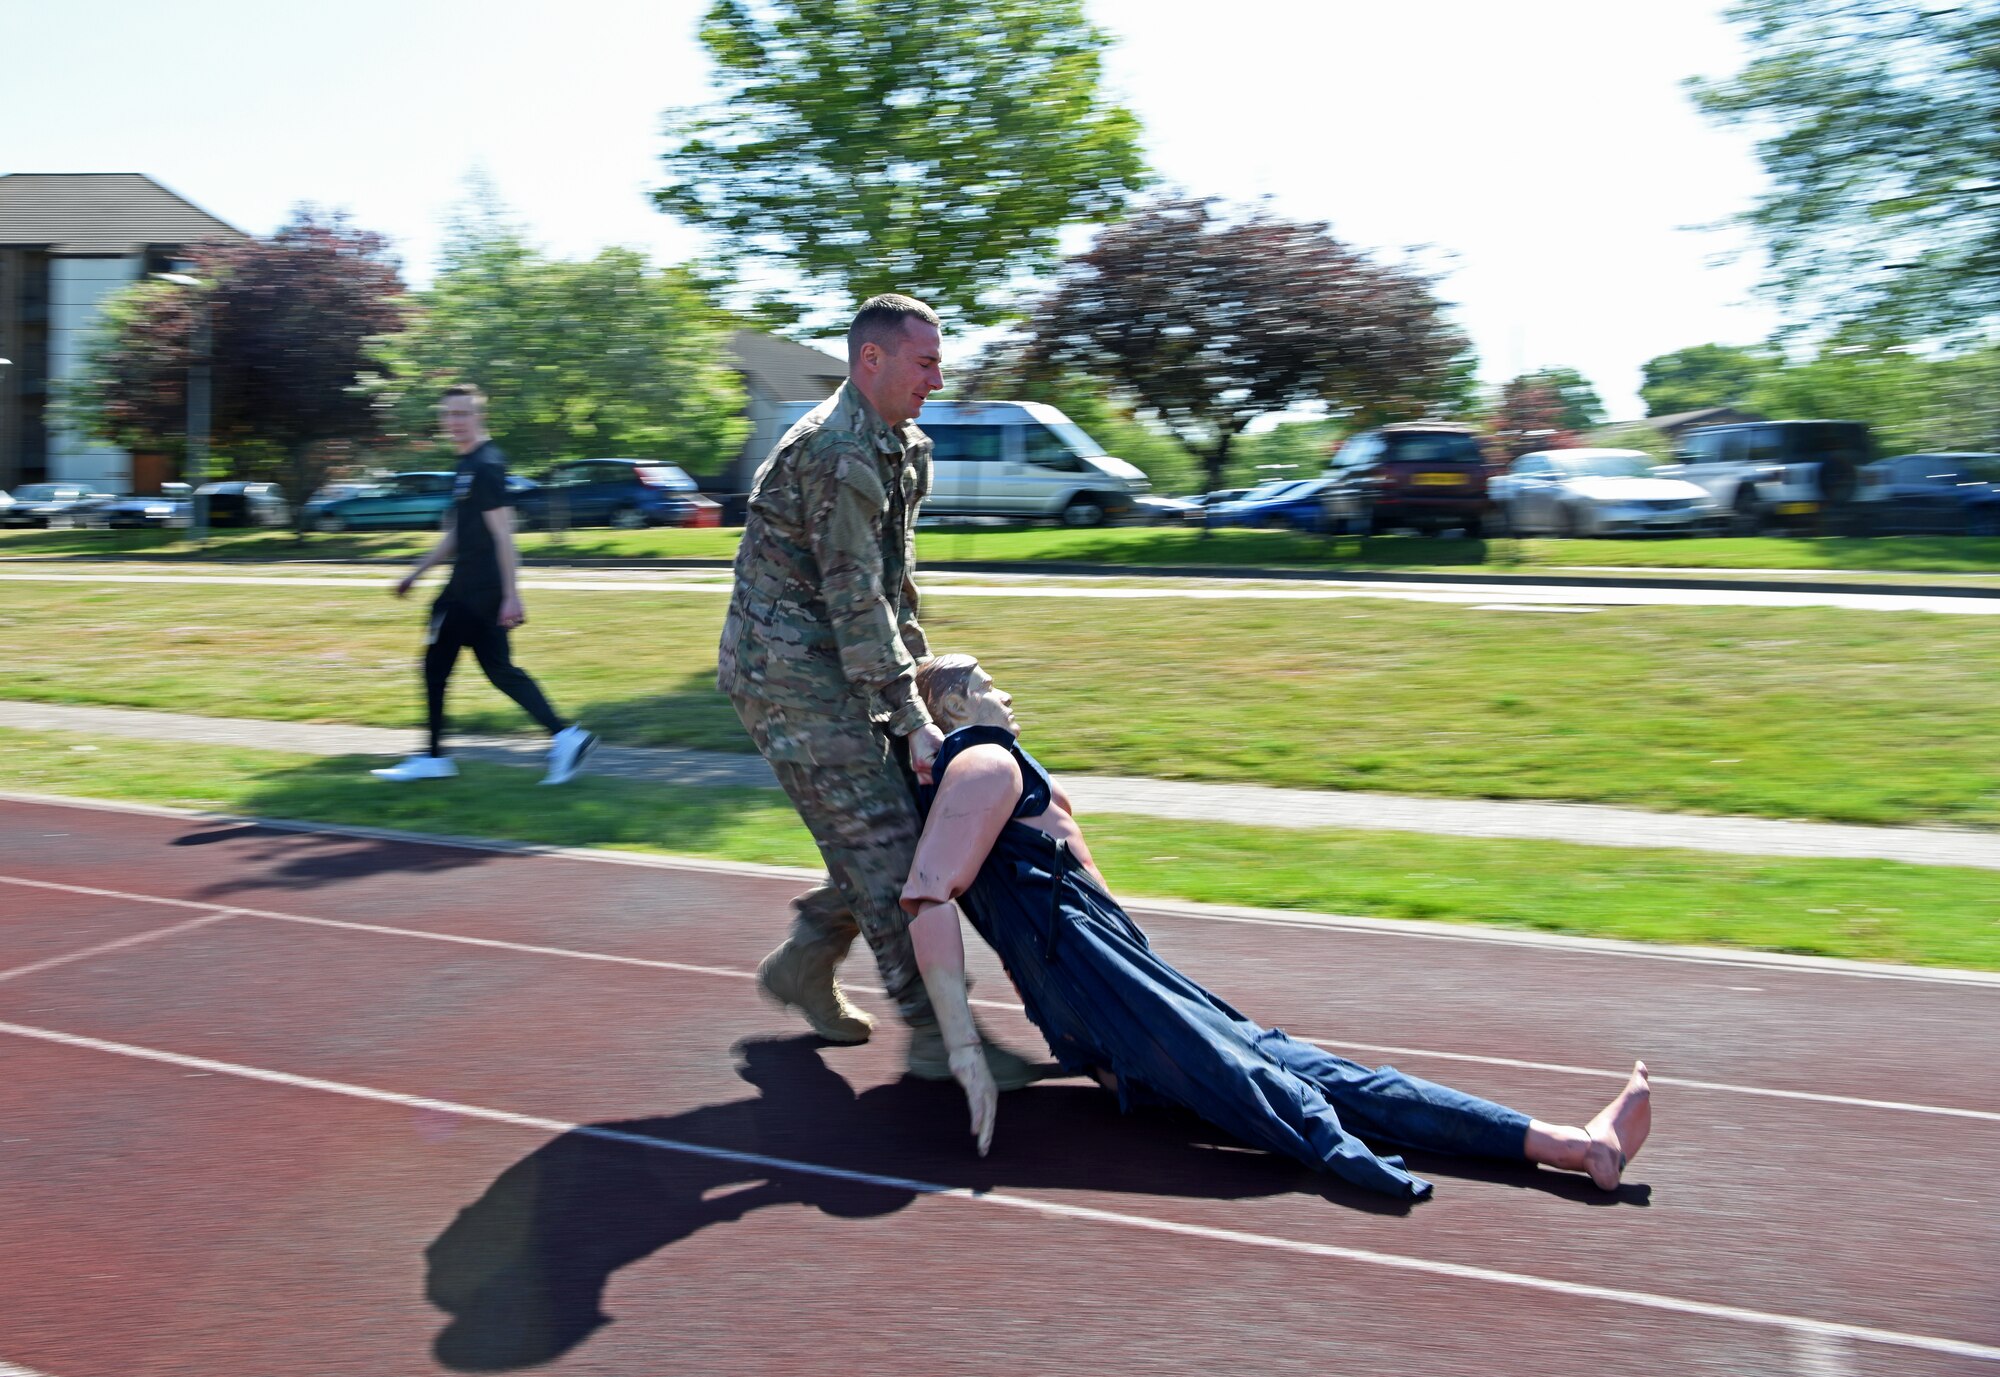 U.S. Air Force 1st Lt. Ricky Sizemore, 100th Security Forces Squadron flight commander, drags a casualty dummy during the 48th Security Forces Squadron’s “Spartan Race,” which is a part of National Police Week at RAF Lakenheath, England, May 14, 2019. National Police Week is a chance for all law enforcement officials to pay respects to the officers who came before them, and also gives the base community the opportunity to support the force as well. (U.S. Air Force photo by Airman 1st Class Brandon Esau)